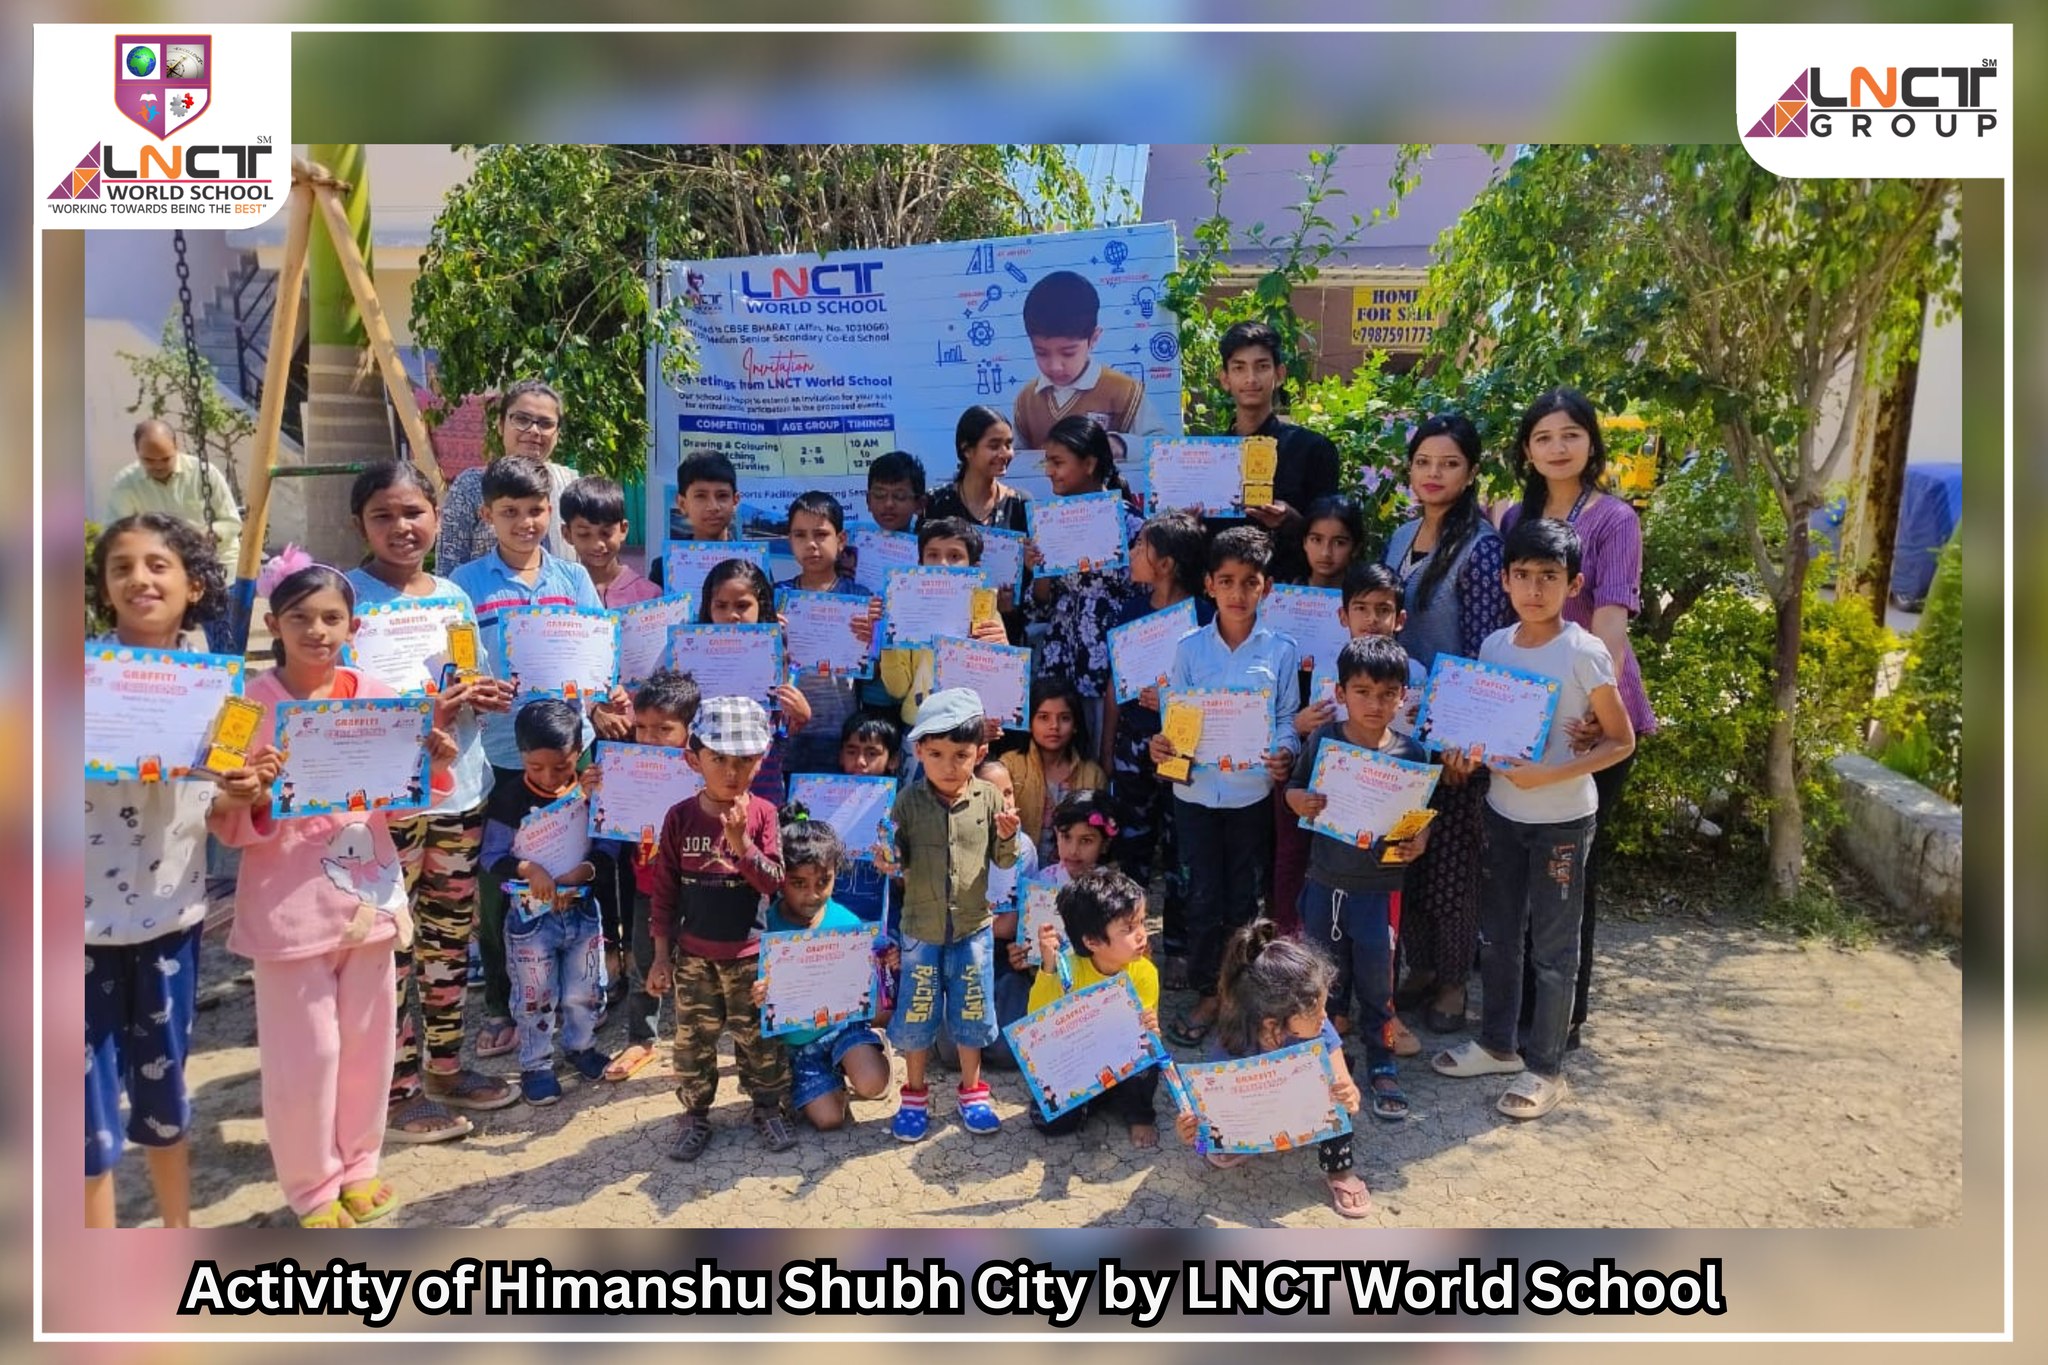 Himanshu Shubh City eagerly participated in the fun filled drawing competition conducted by LNCT WORLD SCHOOL